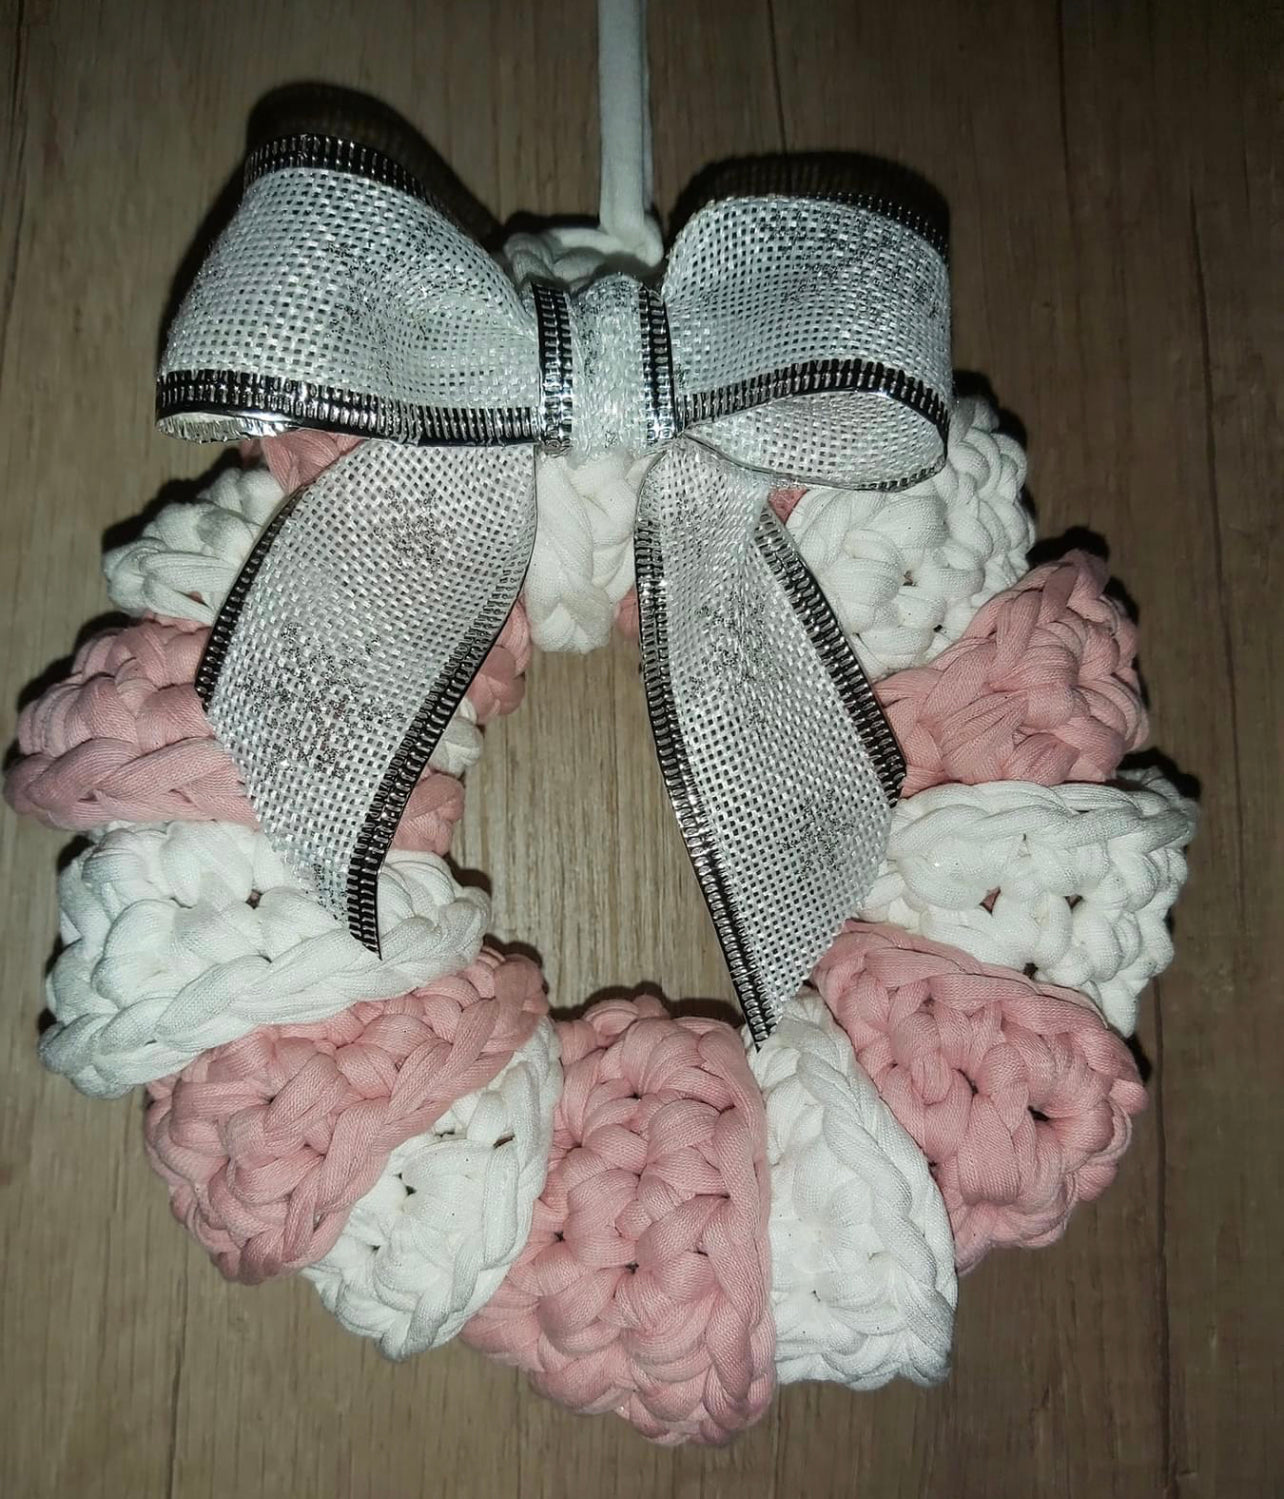 Guest artist: Christmas wreath for front door, handmade Christmas crochet wreath by guest artist Emese, holiday decoration, Vintage Crochet Christmas Wreath